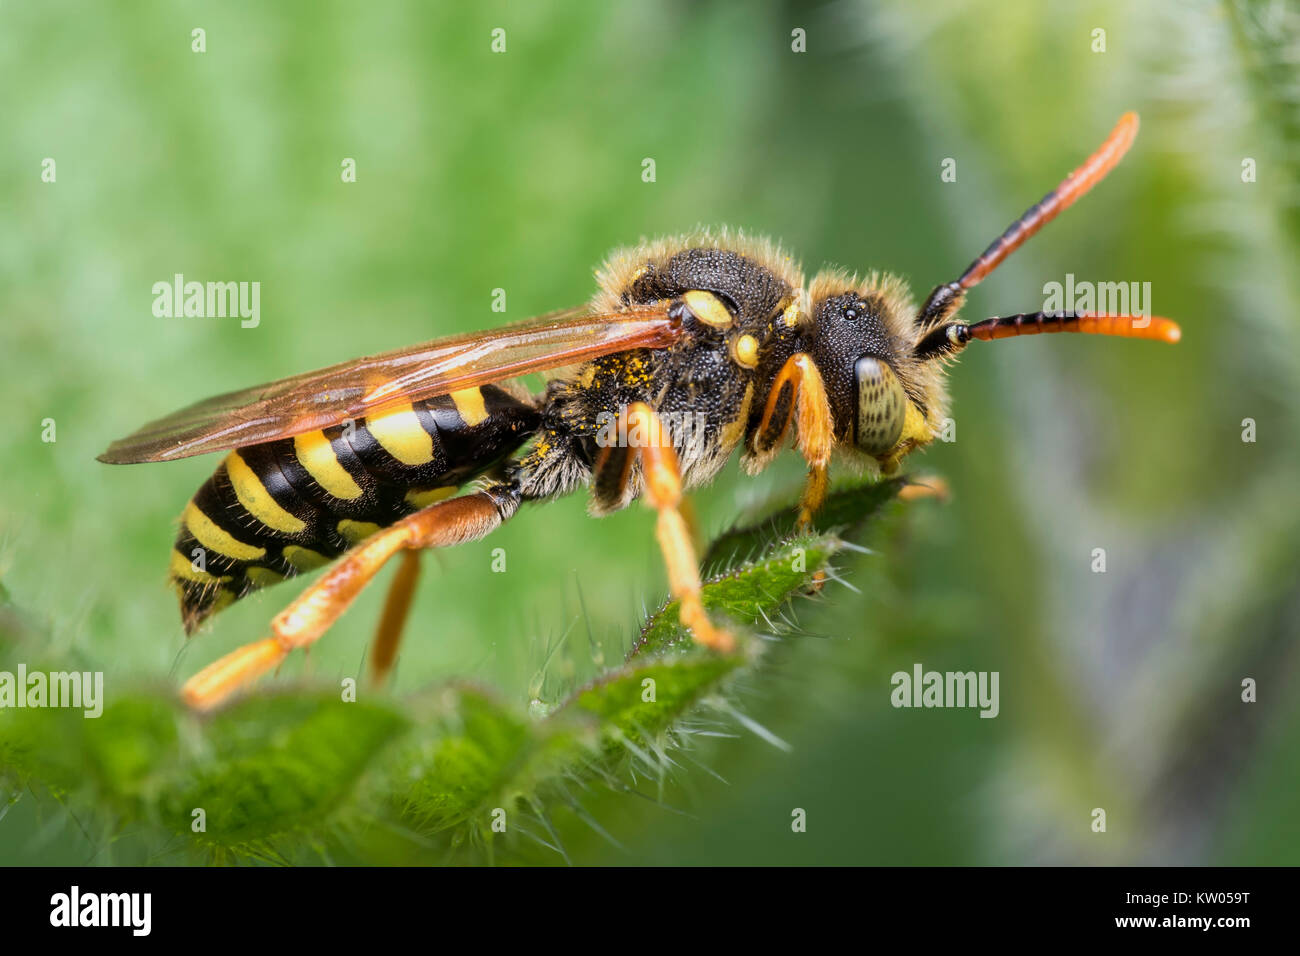 Gooden's Nomad Bee (Nomada goodeniana) (also called a Cuckoo Bee) resting on the edge of a leaf. Cahir, Tipperary, Ireland Stock Photo